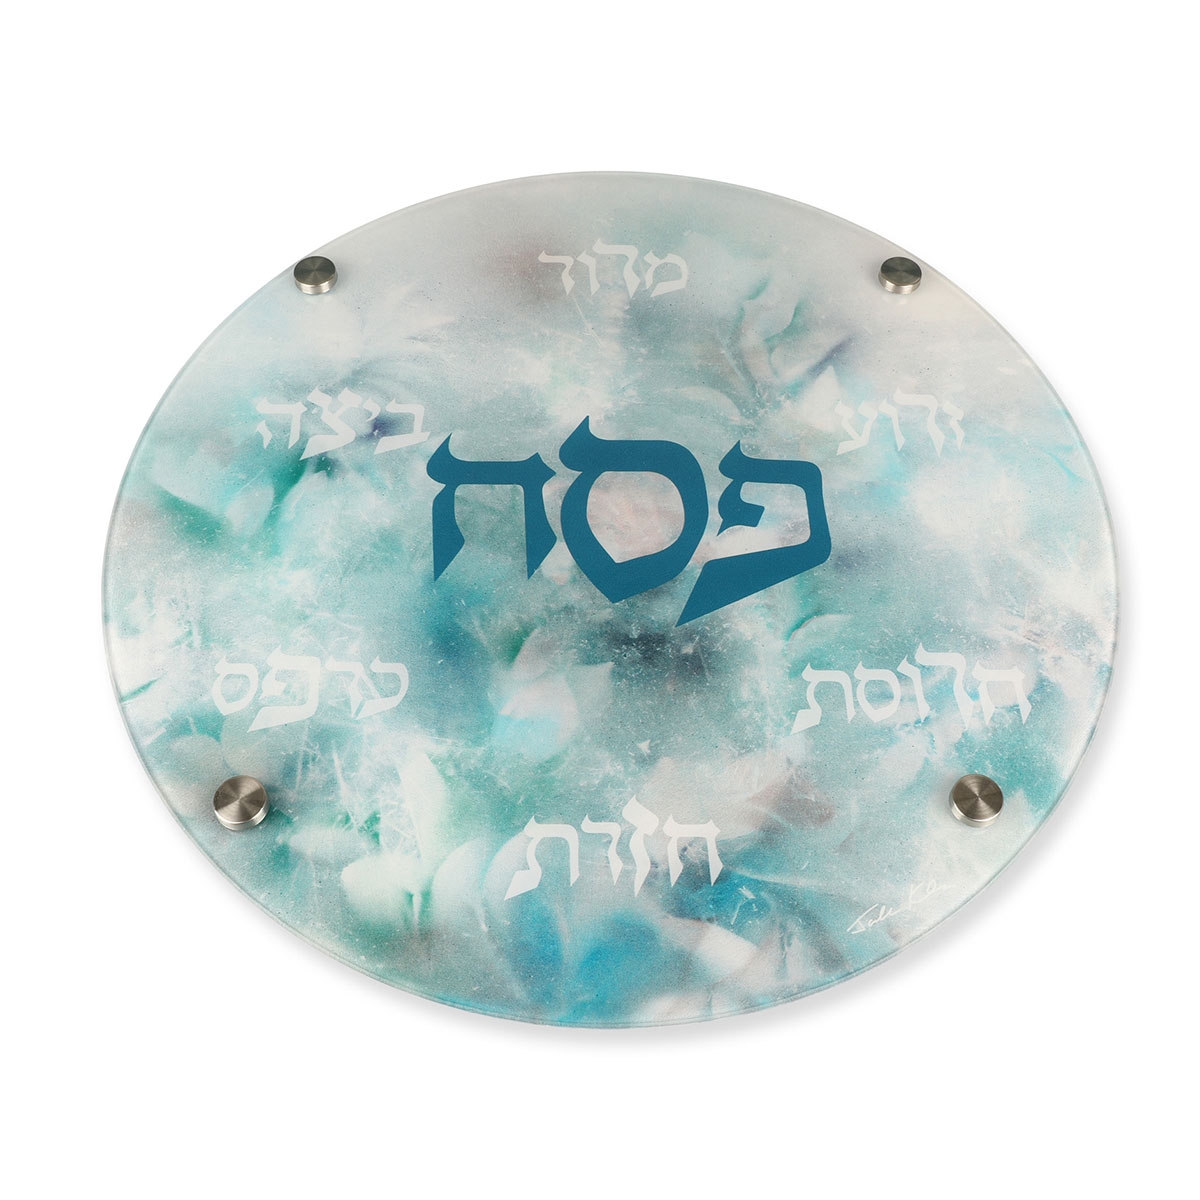 Glass Seder Plate With Marbled Design By Jordana Klein - 1